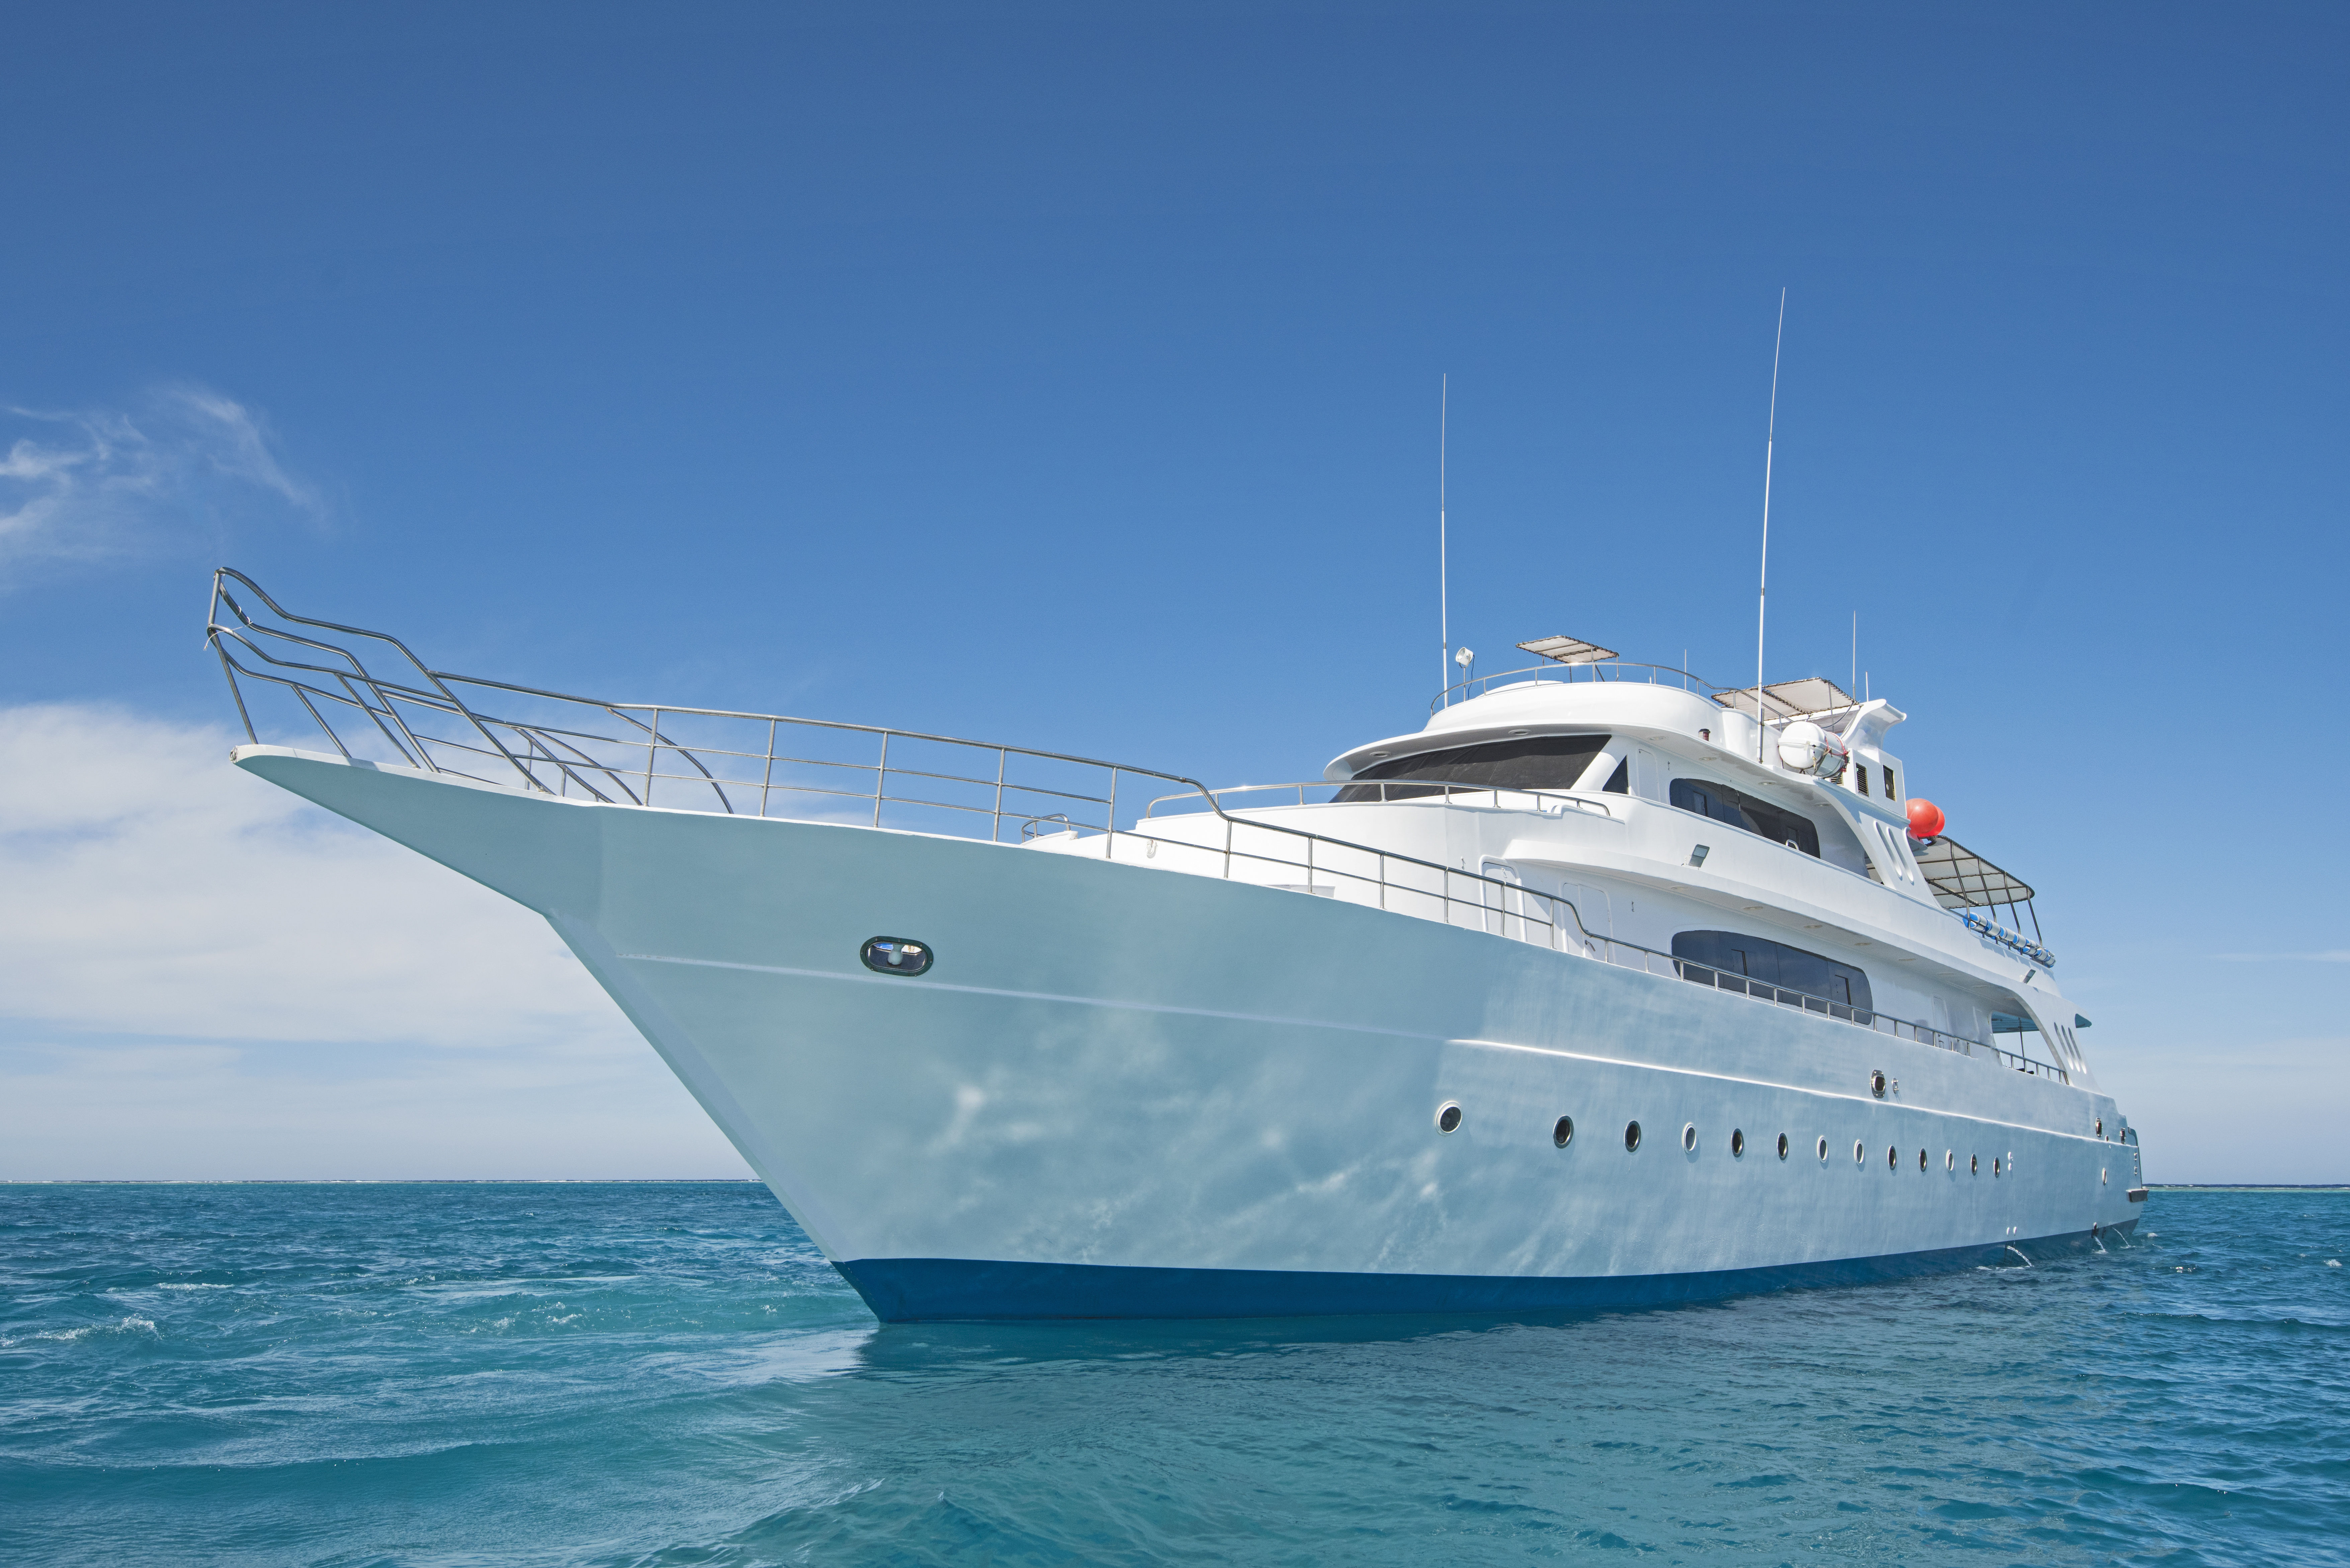 Beautiful white motor yacht scuba diving liveaboard on calm blue sea with clear blue skies.